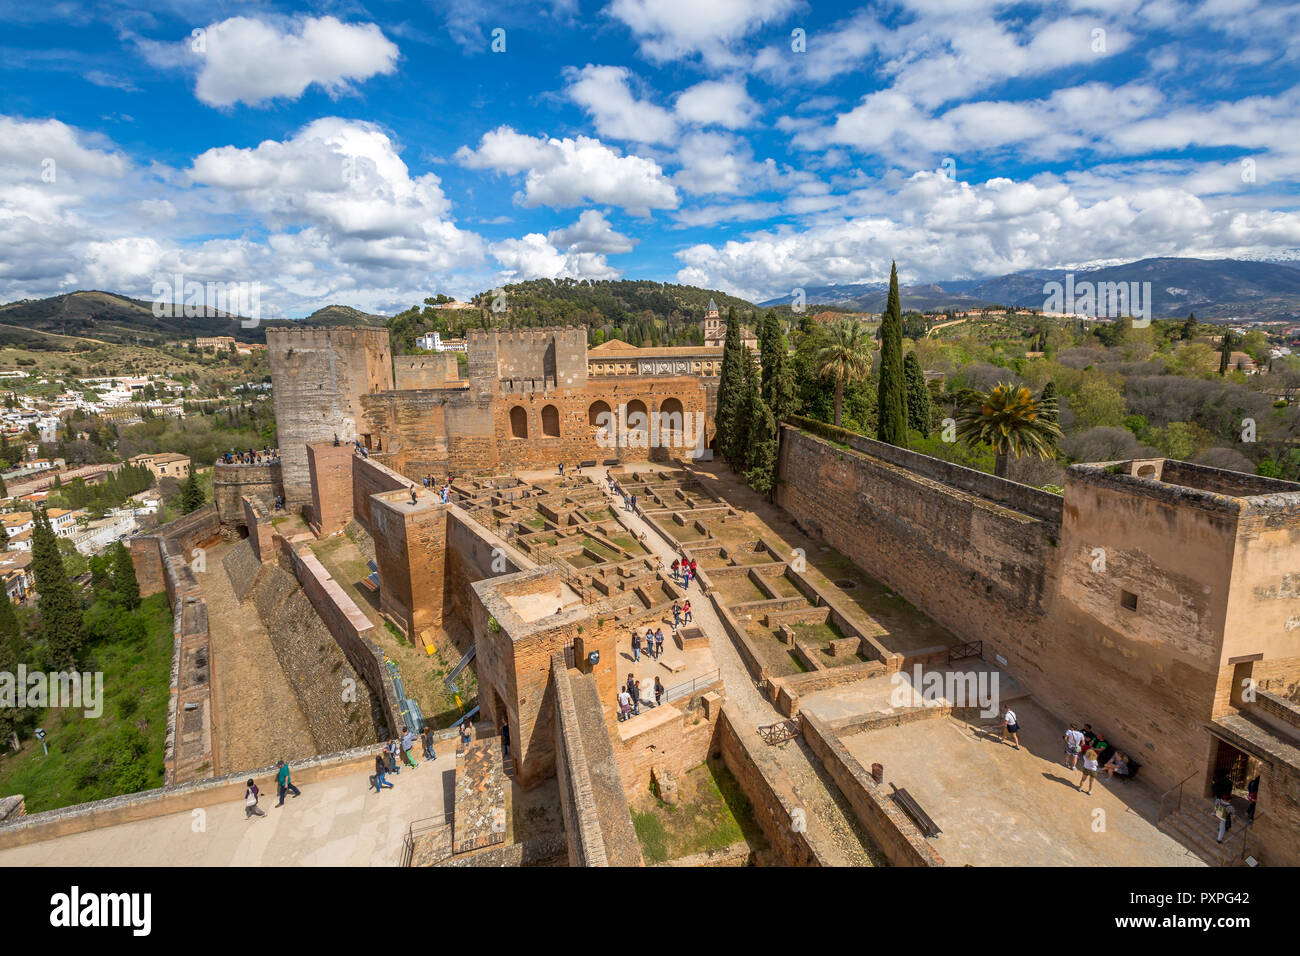 Alhambra de Granada, Spain - April 17, 2016: people and tourists visiting the Alcazaba de Granada, one of the most visited attractions of Andalusia. Aerial view from the tower of fortress. Stock Photo